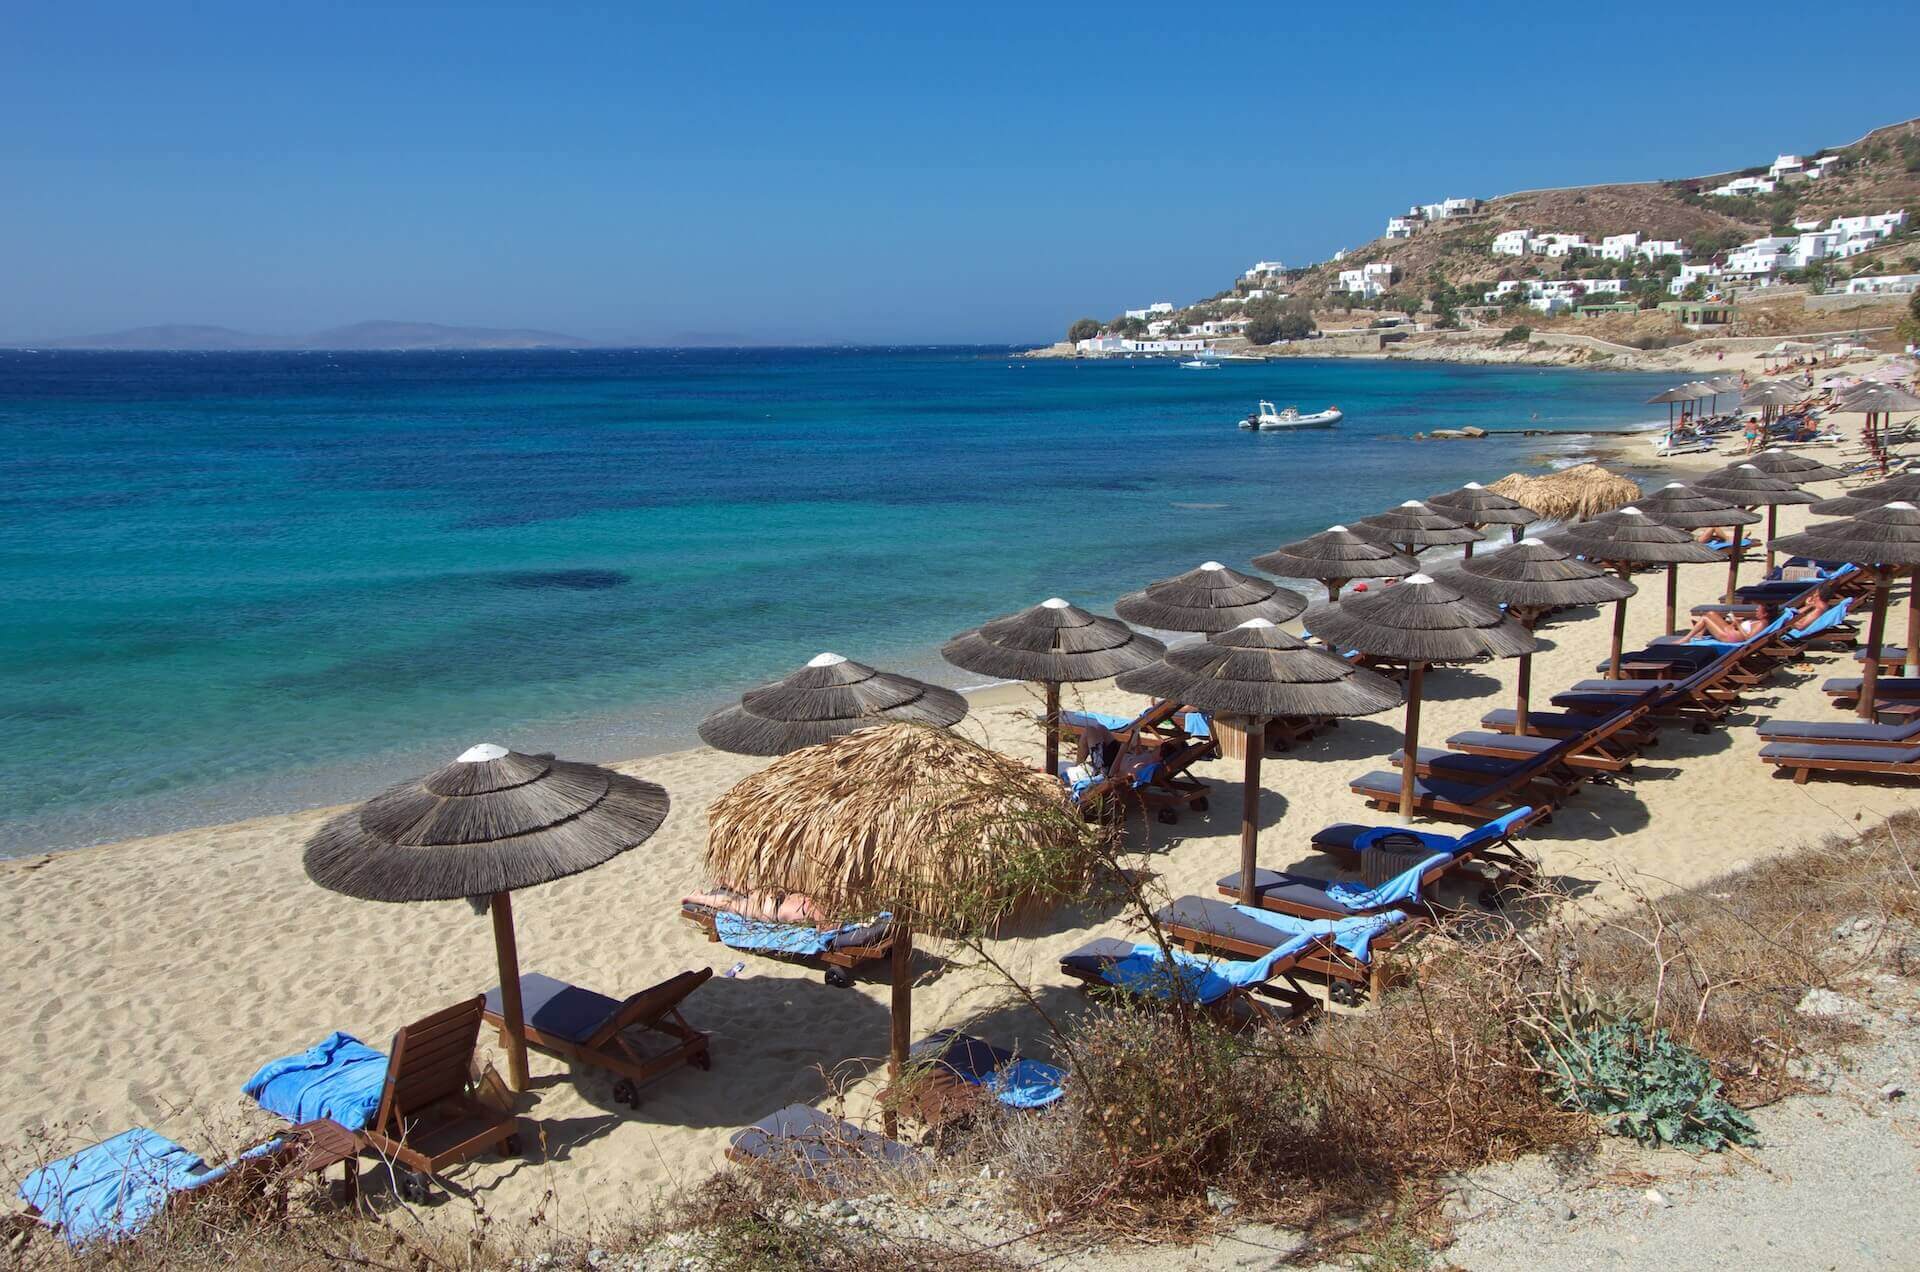 Sunbeds and umbrellas on the beach in Mykonos